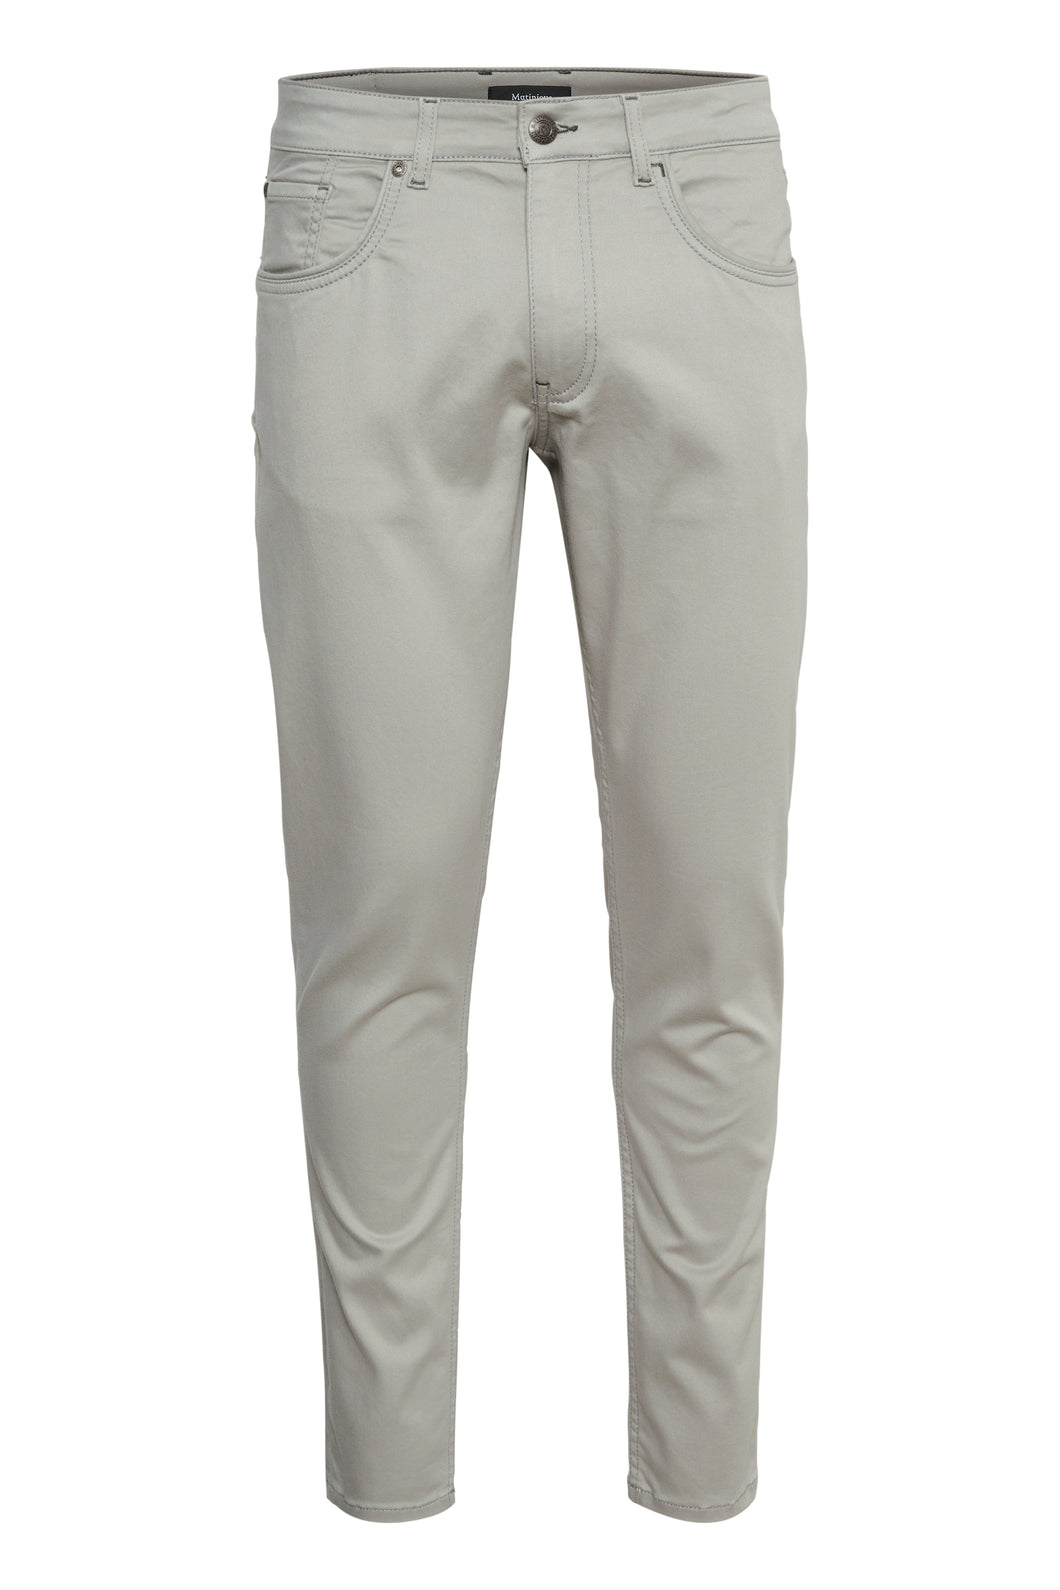 MATINIQUE - Pete Pants in Ghost Gray